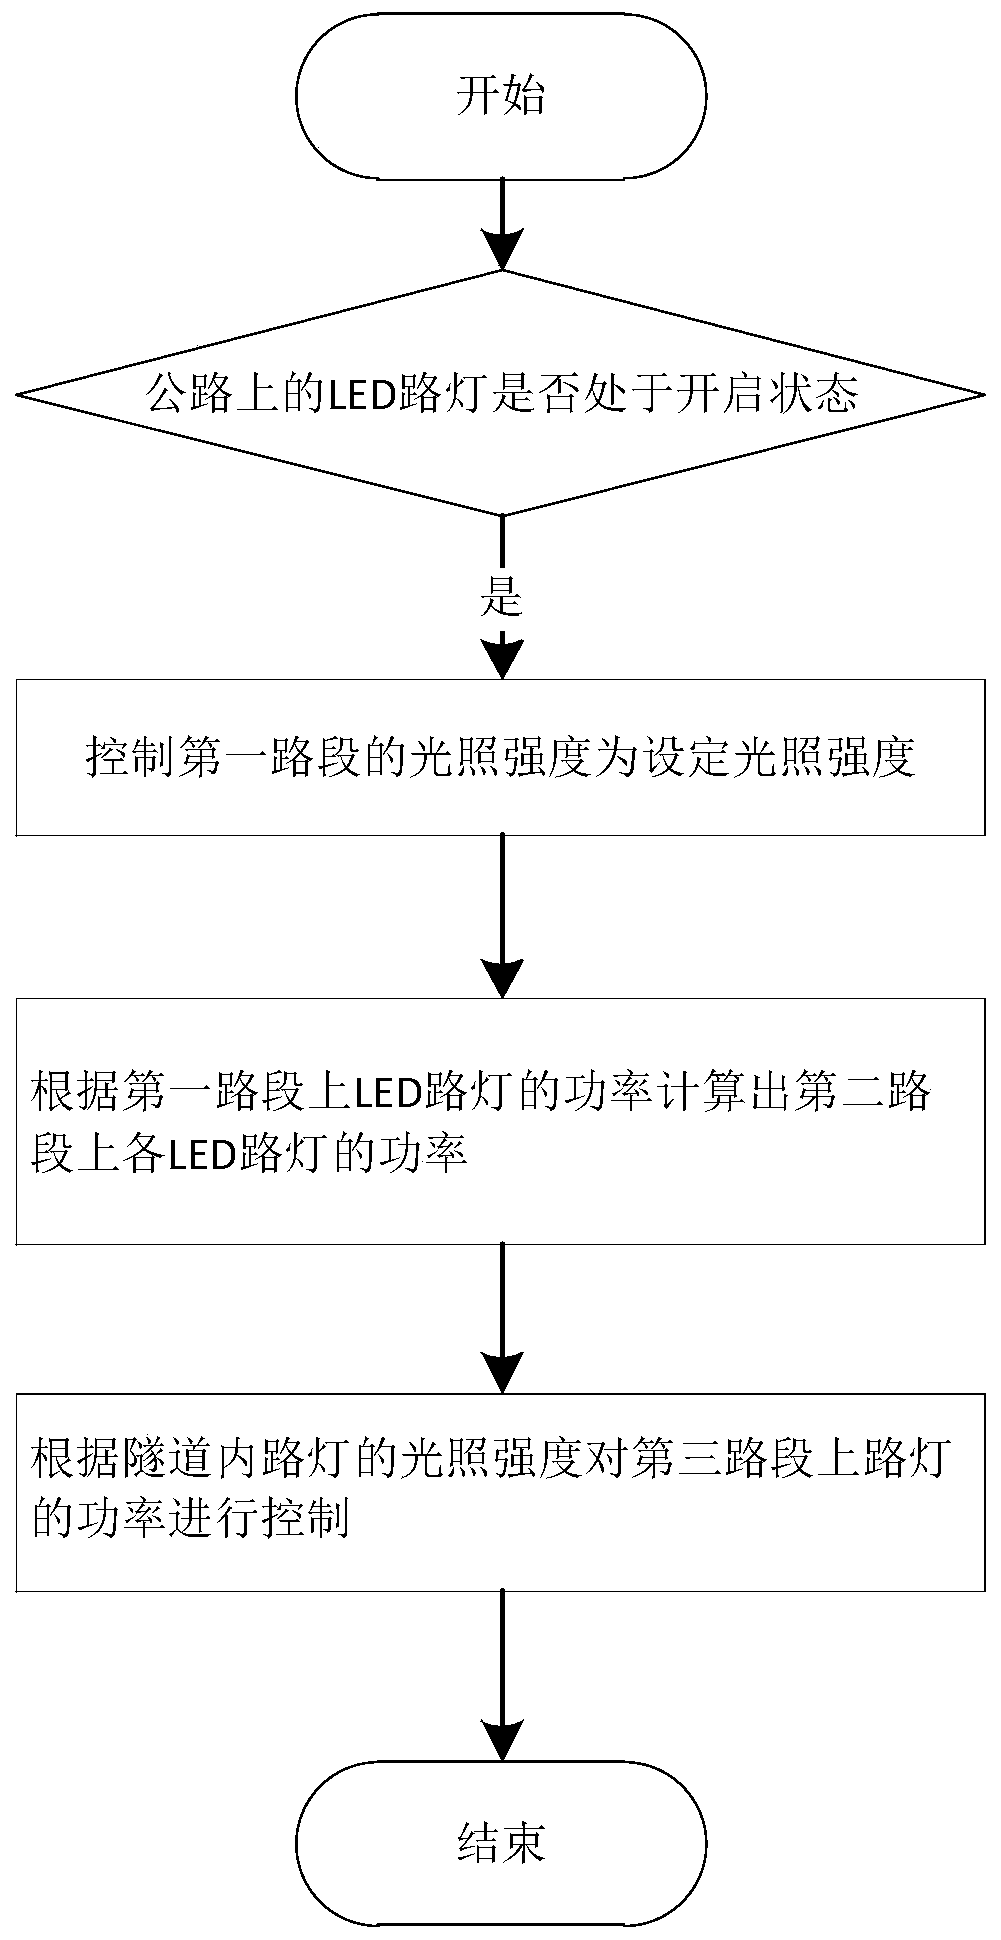 Control method and system of LED intelligent street lamps for highway lighting